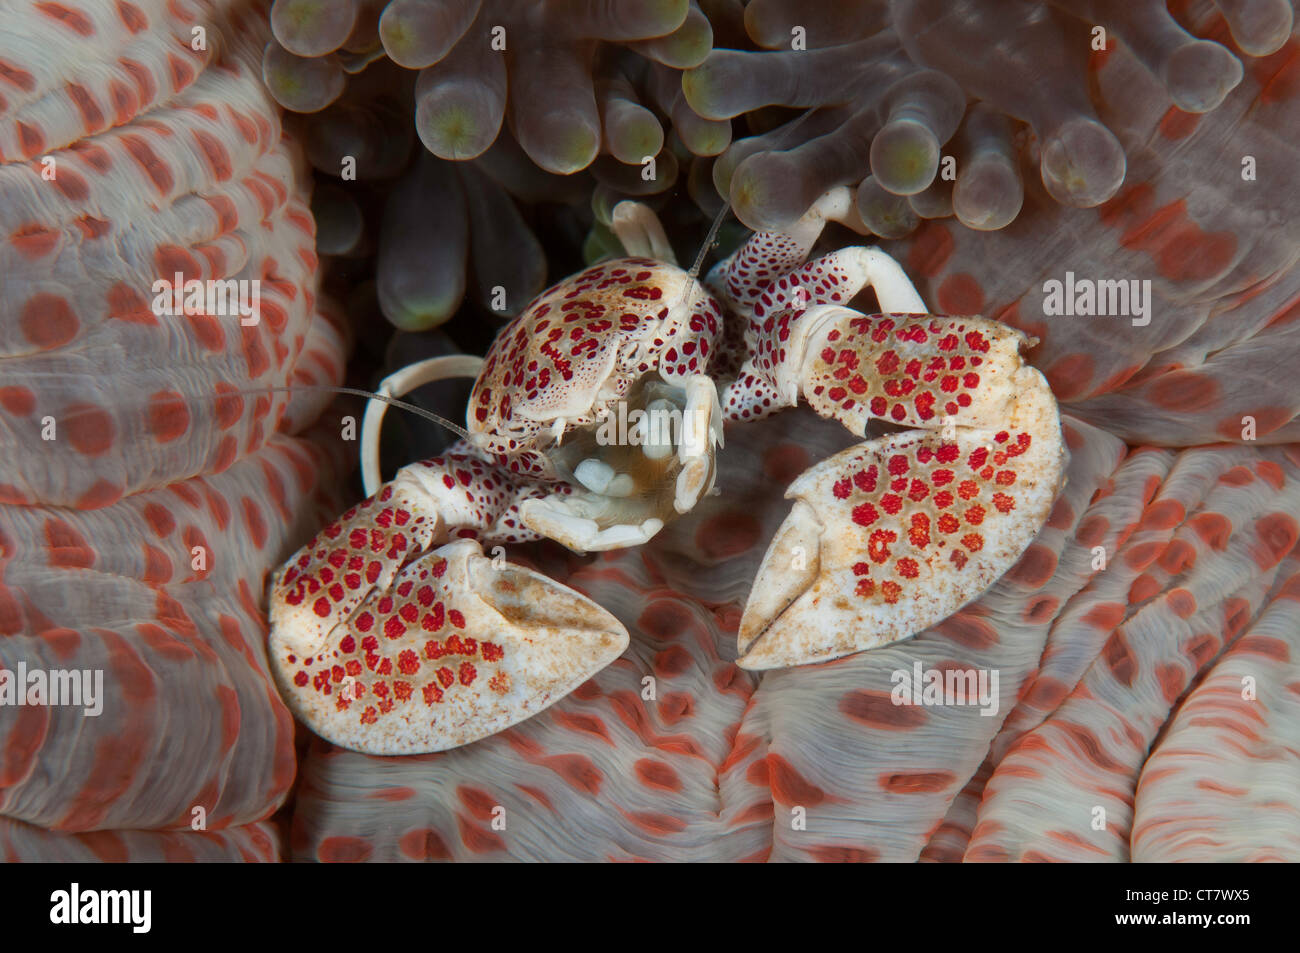 Porcelain crab (Neopetrolisthes oshimai) on an anemone at the Nudi Retreat 2 dive site in the Lembeh Straits Stock Photo